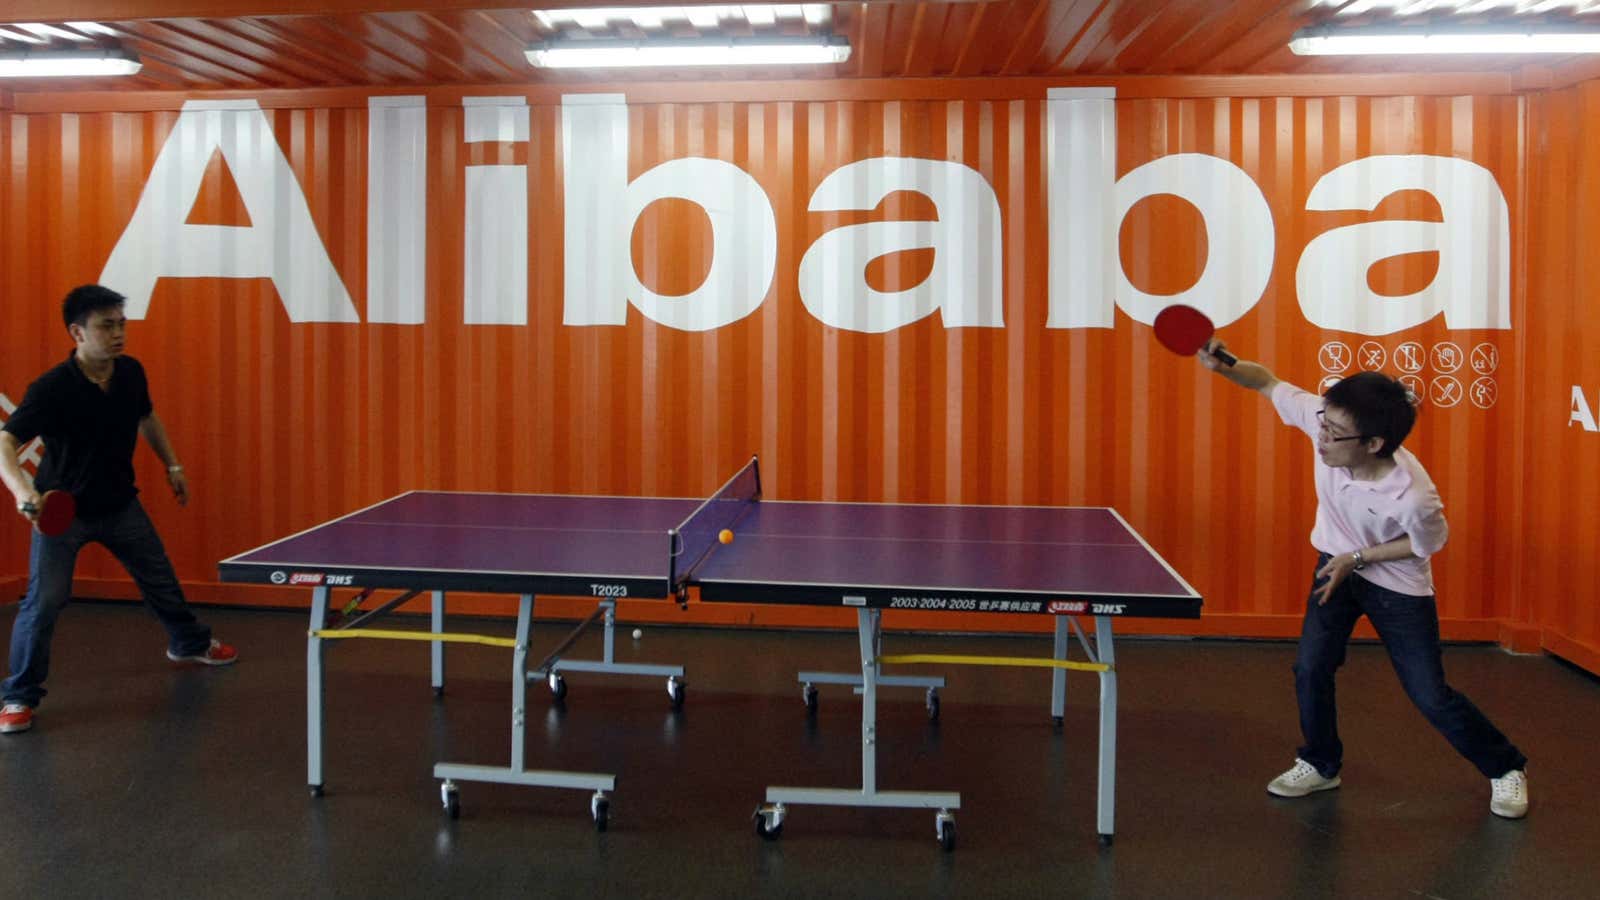 Alibaba’s IPO provides a little something for everyone.